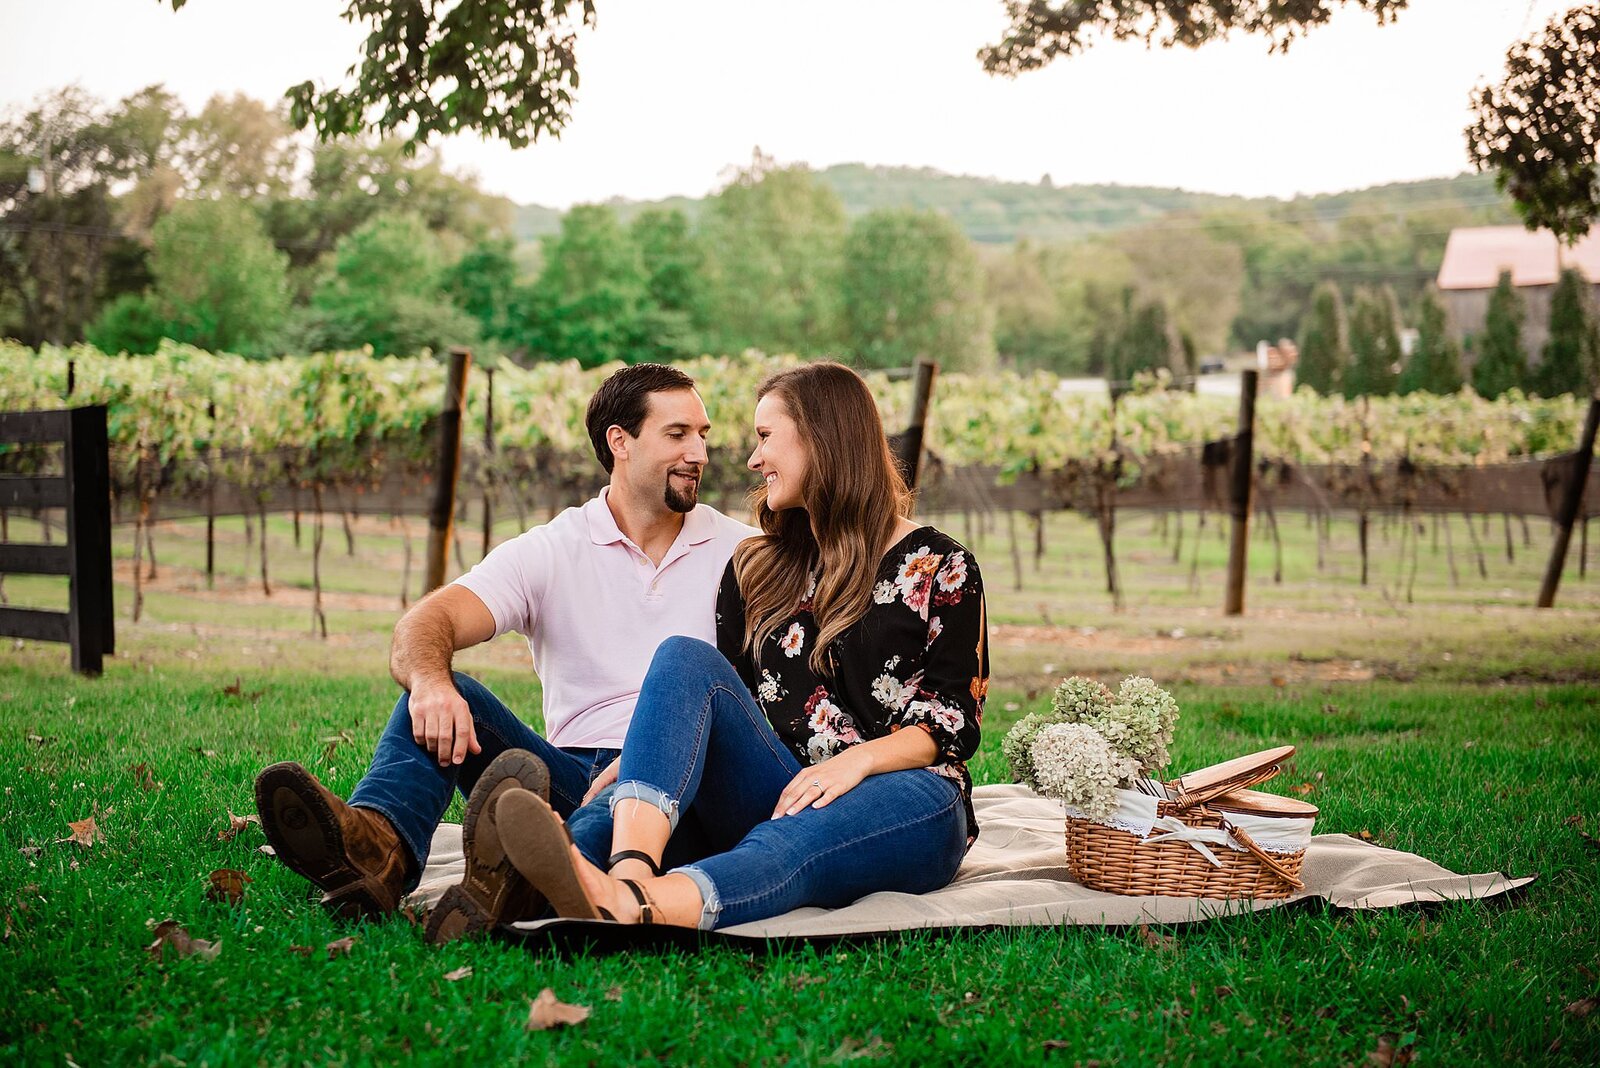 Couple having a picnic in the vineyards at Arrington, picnic basket and blanket on the ground